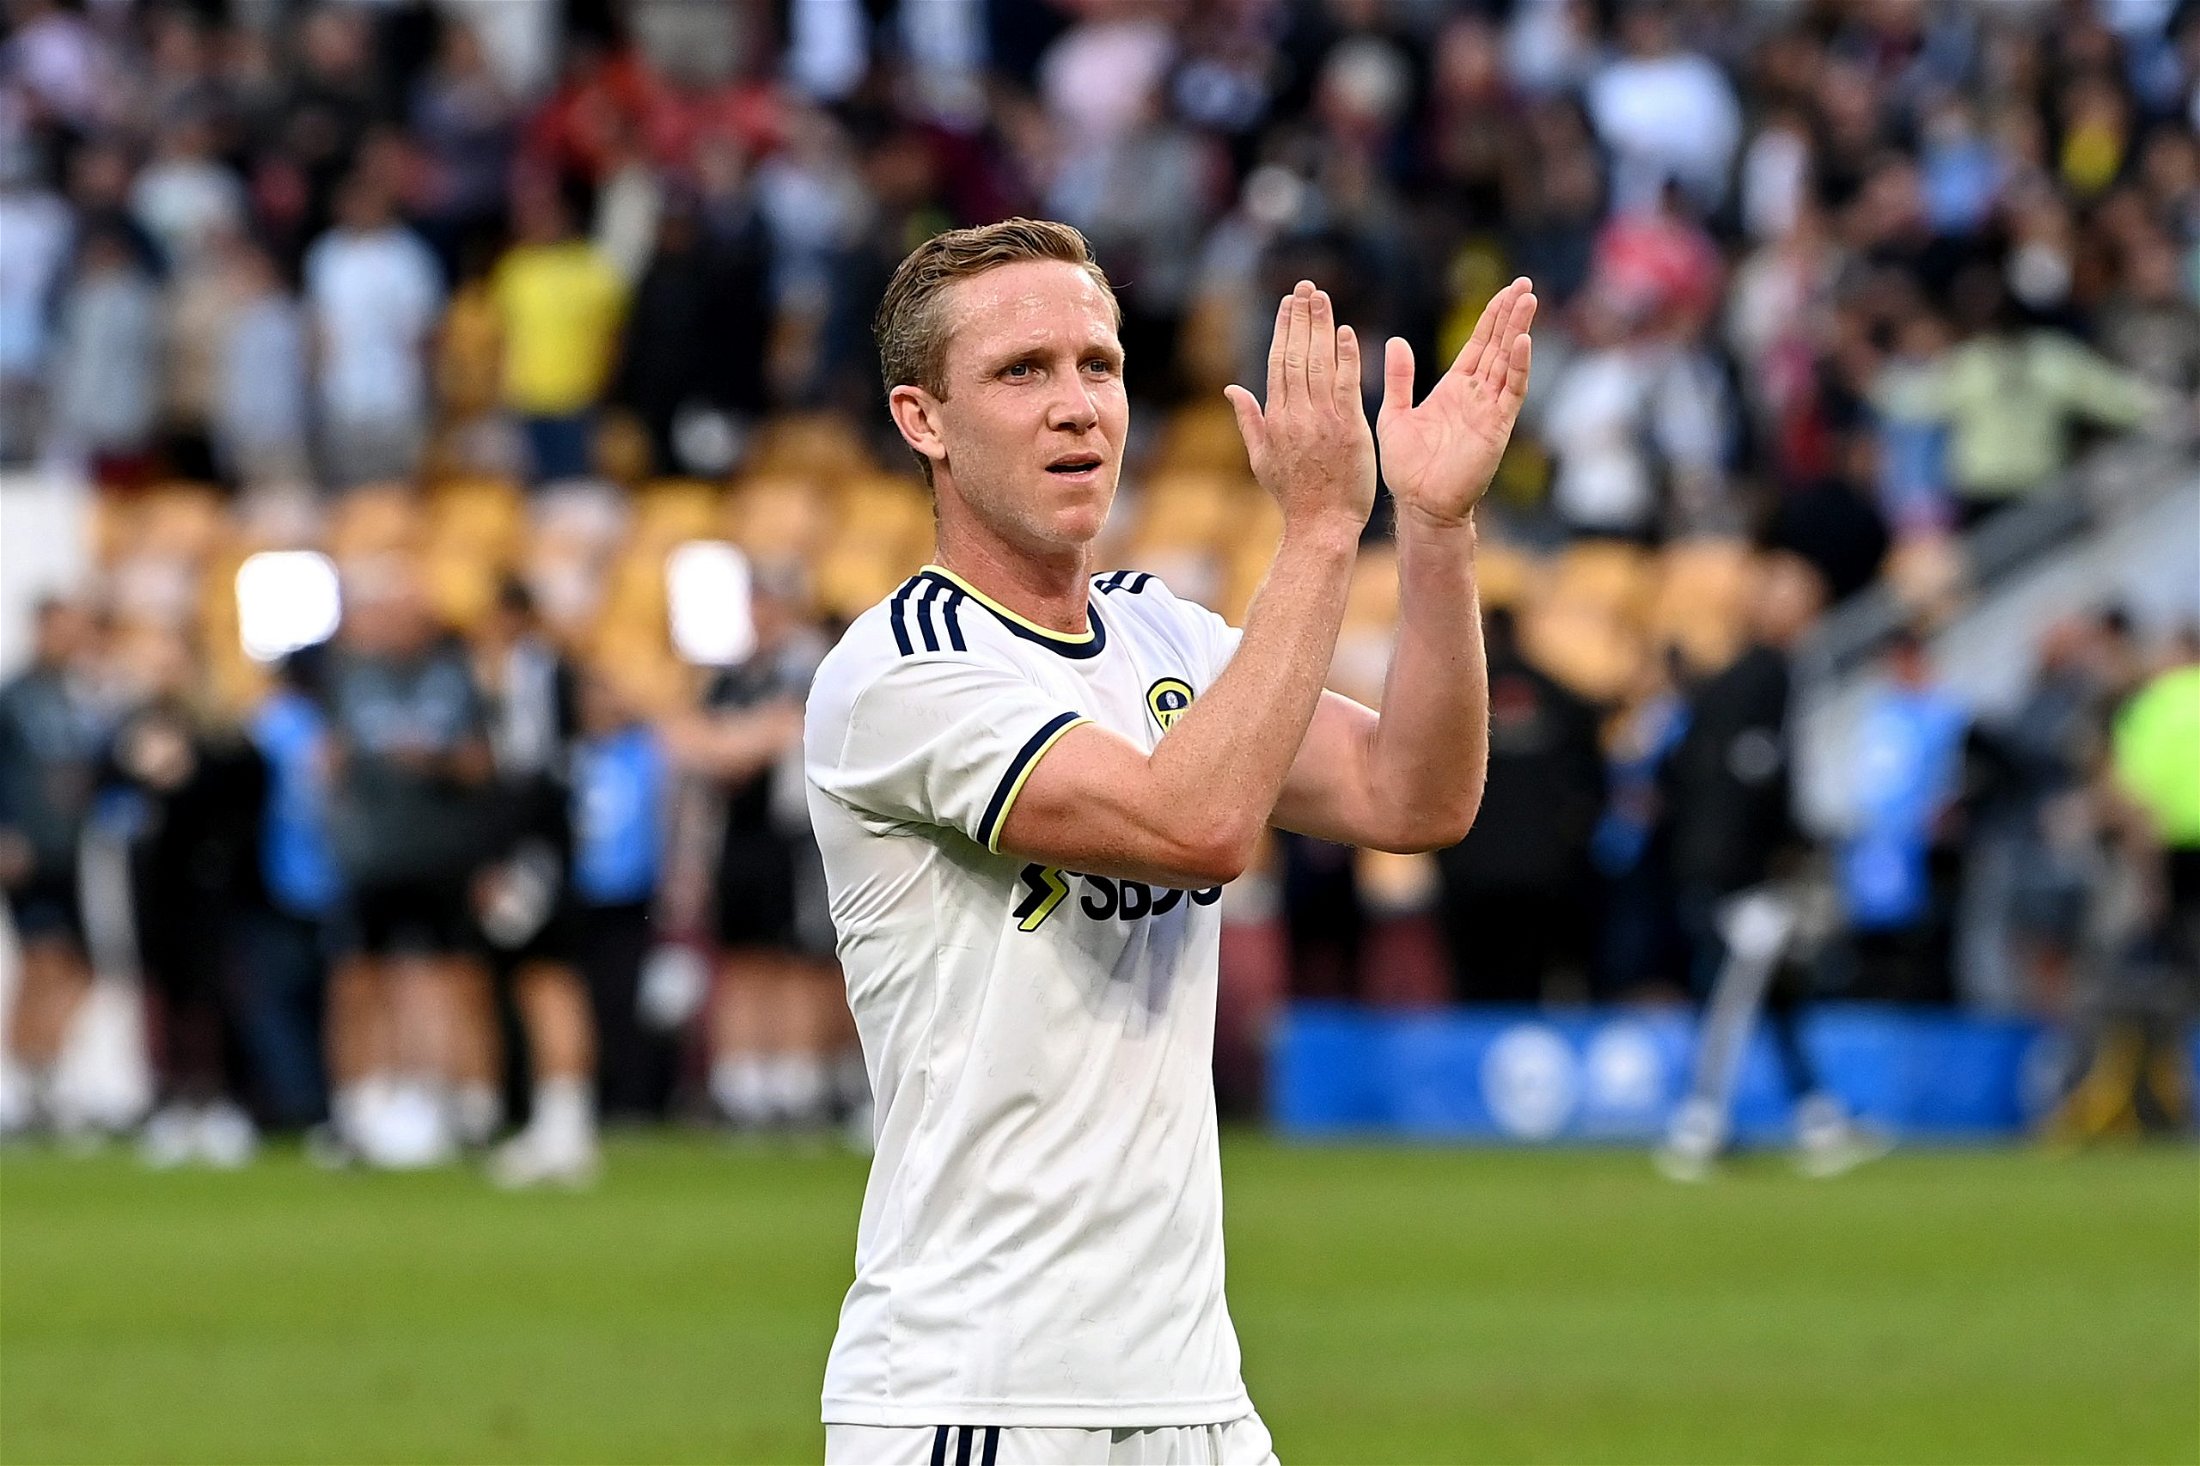 Quiz: Has Leeds United’s Adam Forshaw scored a career goal against the following 15 clubs?